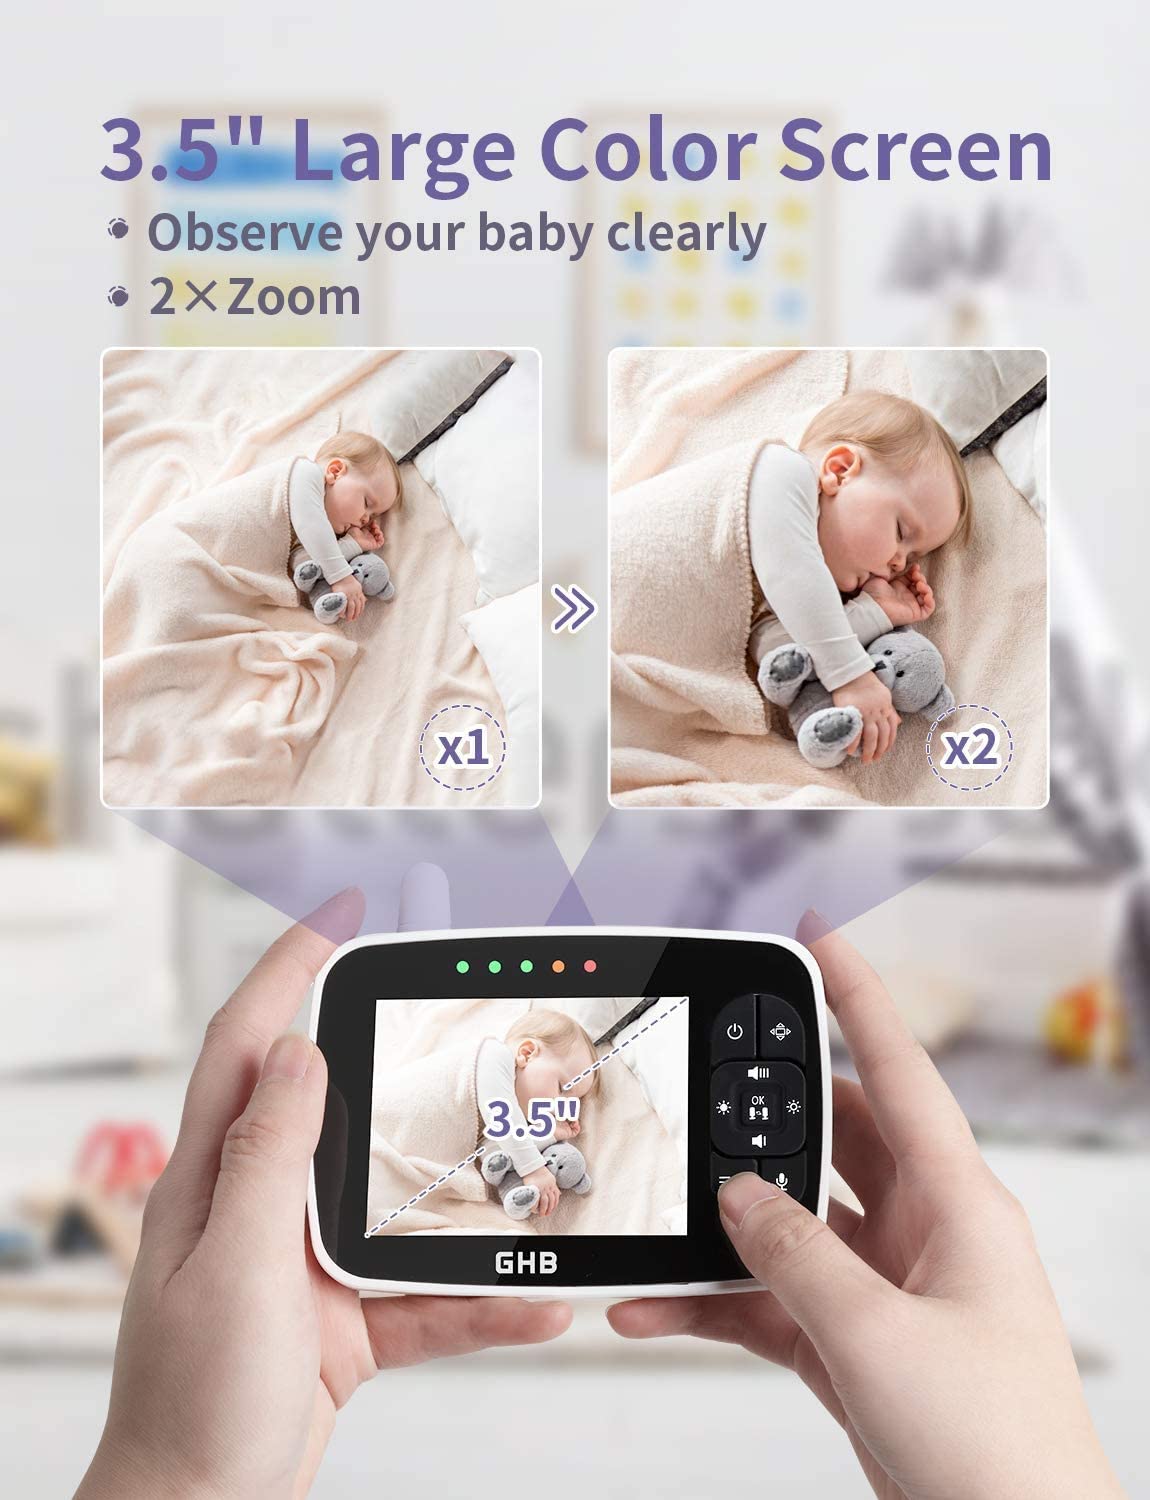 GHB Baby Monitor with Camera and Audio 5 HD 720P Remote Pan-Tilt-Zoom  Support up to 4 Cameras 980ft Range 3020mAh Night Vision Temperature Sensor  